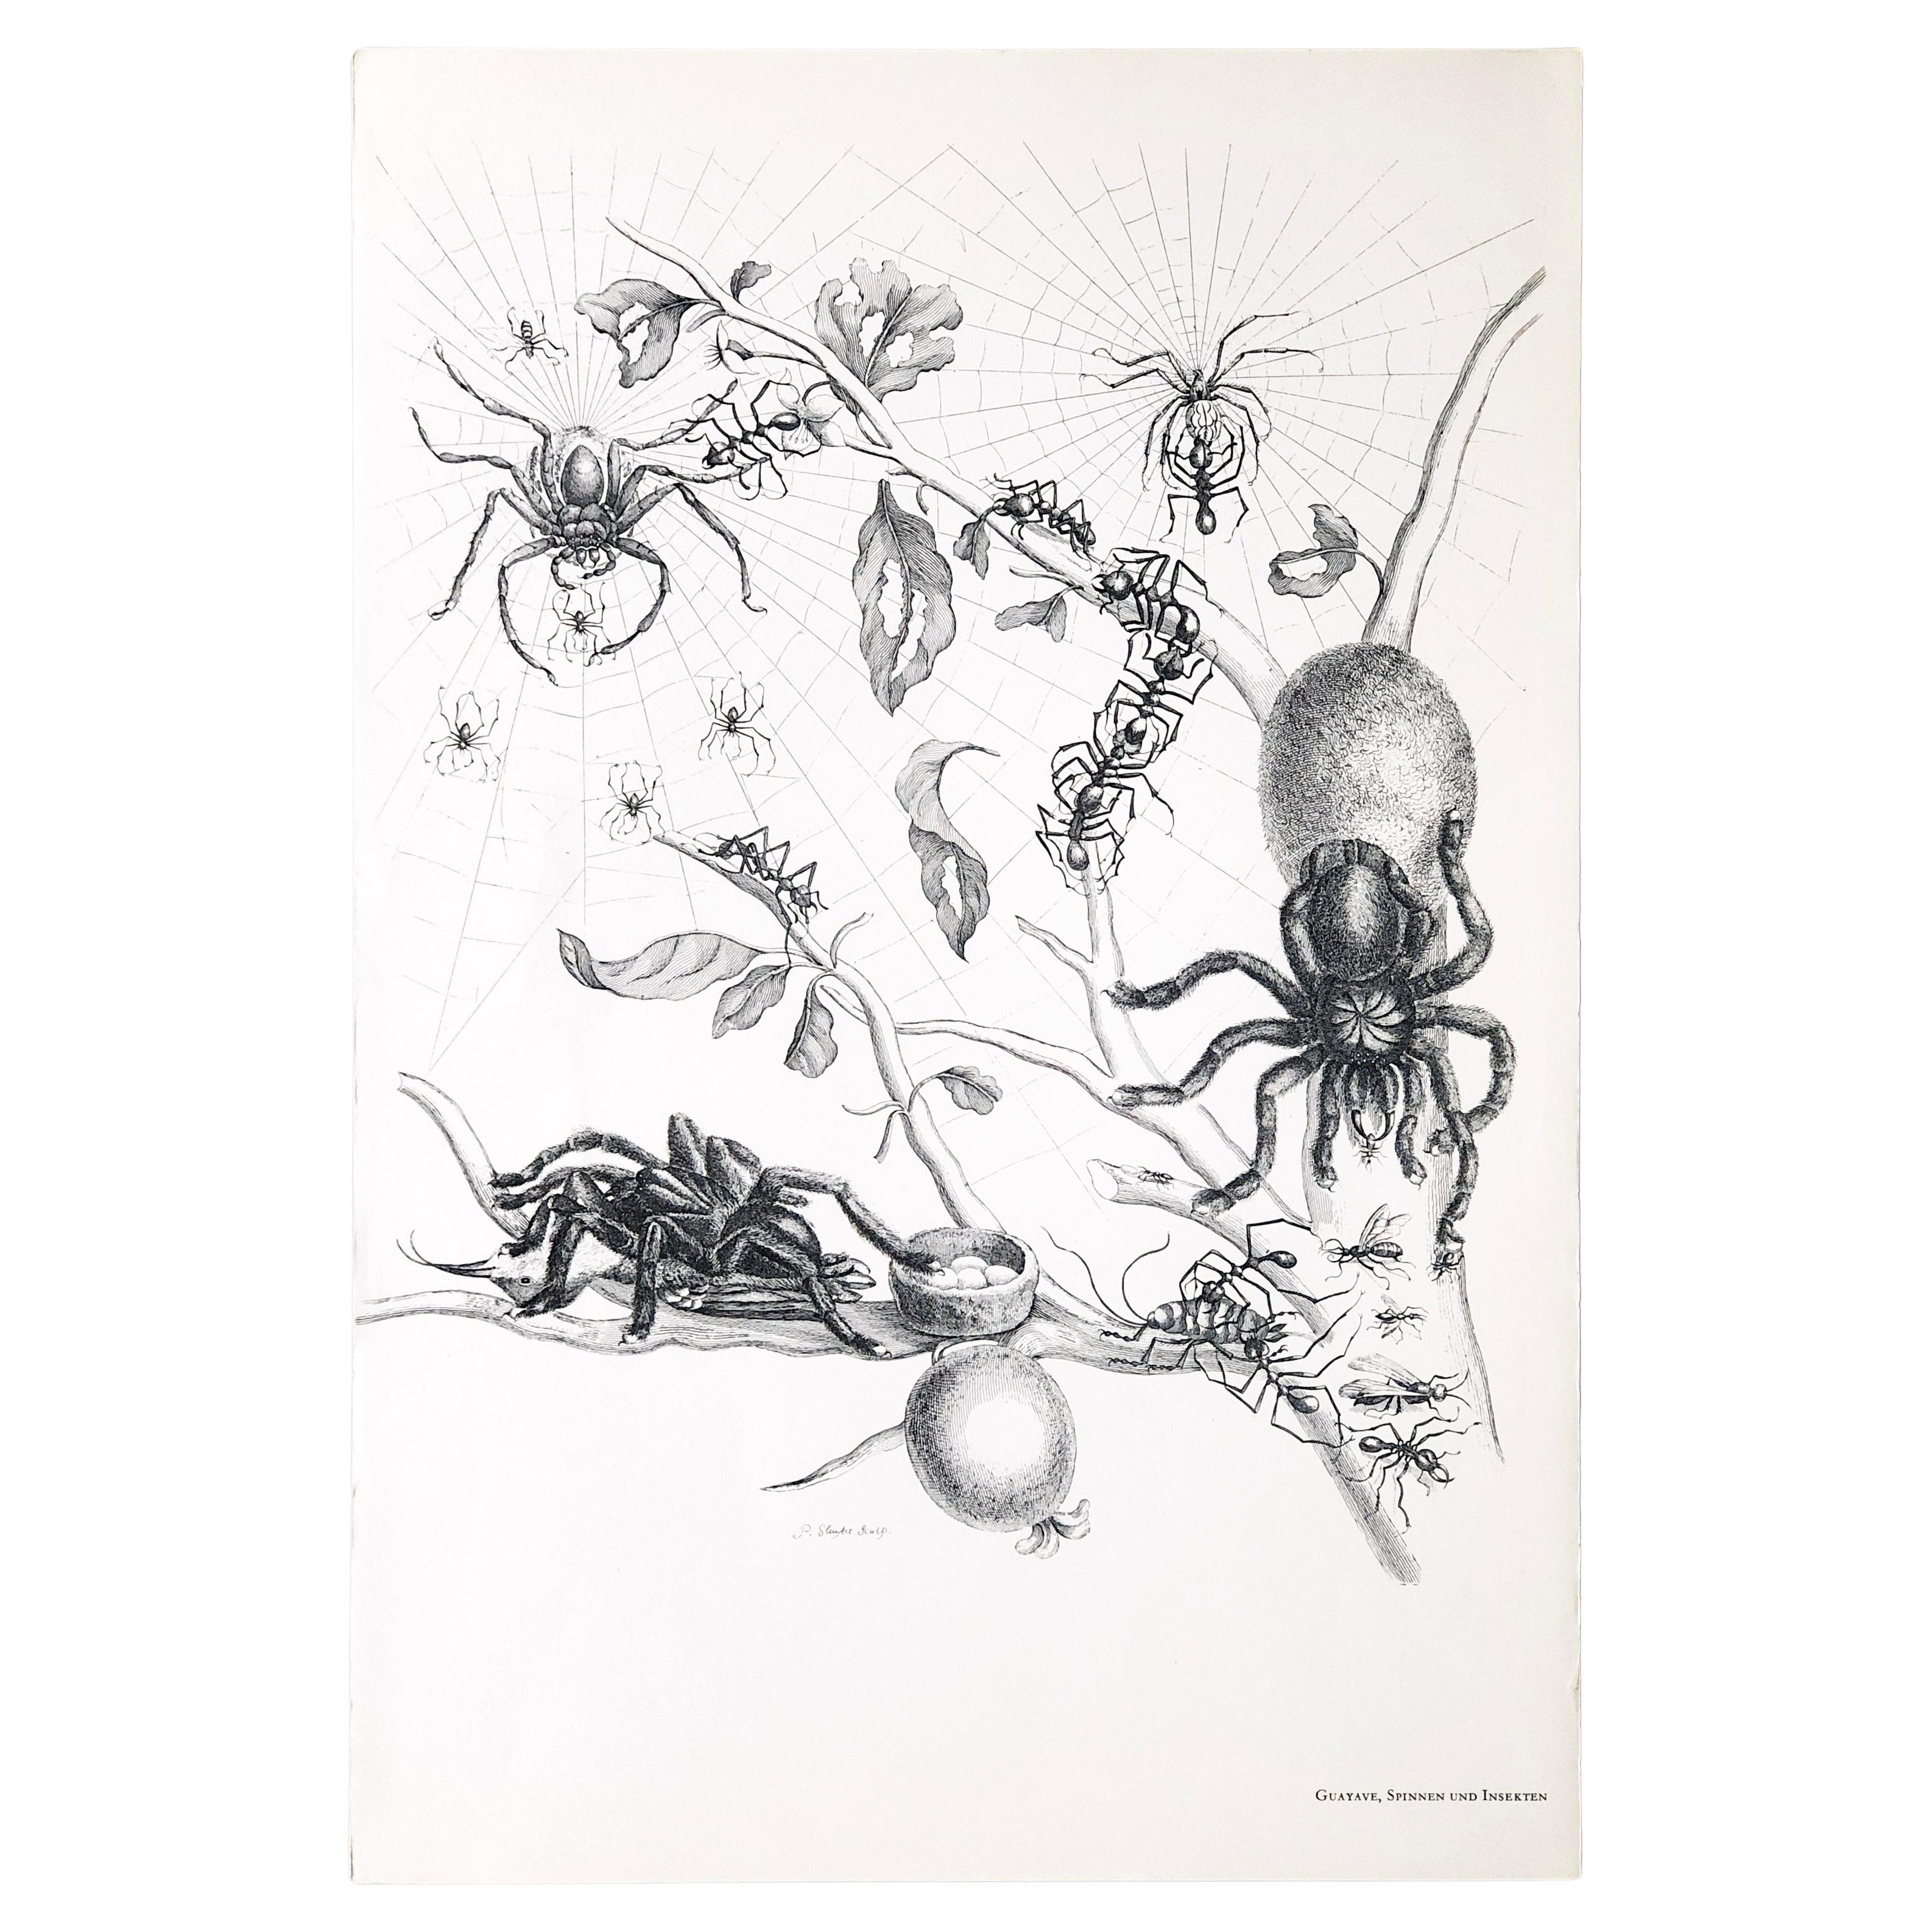 Maria Sibylla Merian - P. Sluyter Sculp - Guayave spiders and insects Nr. 18